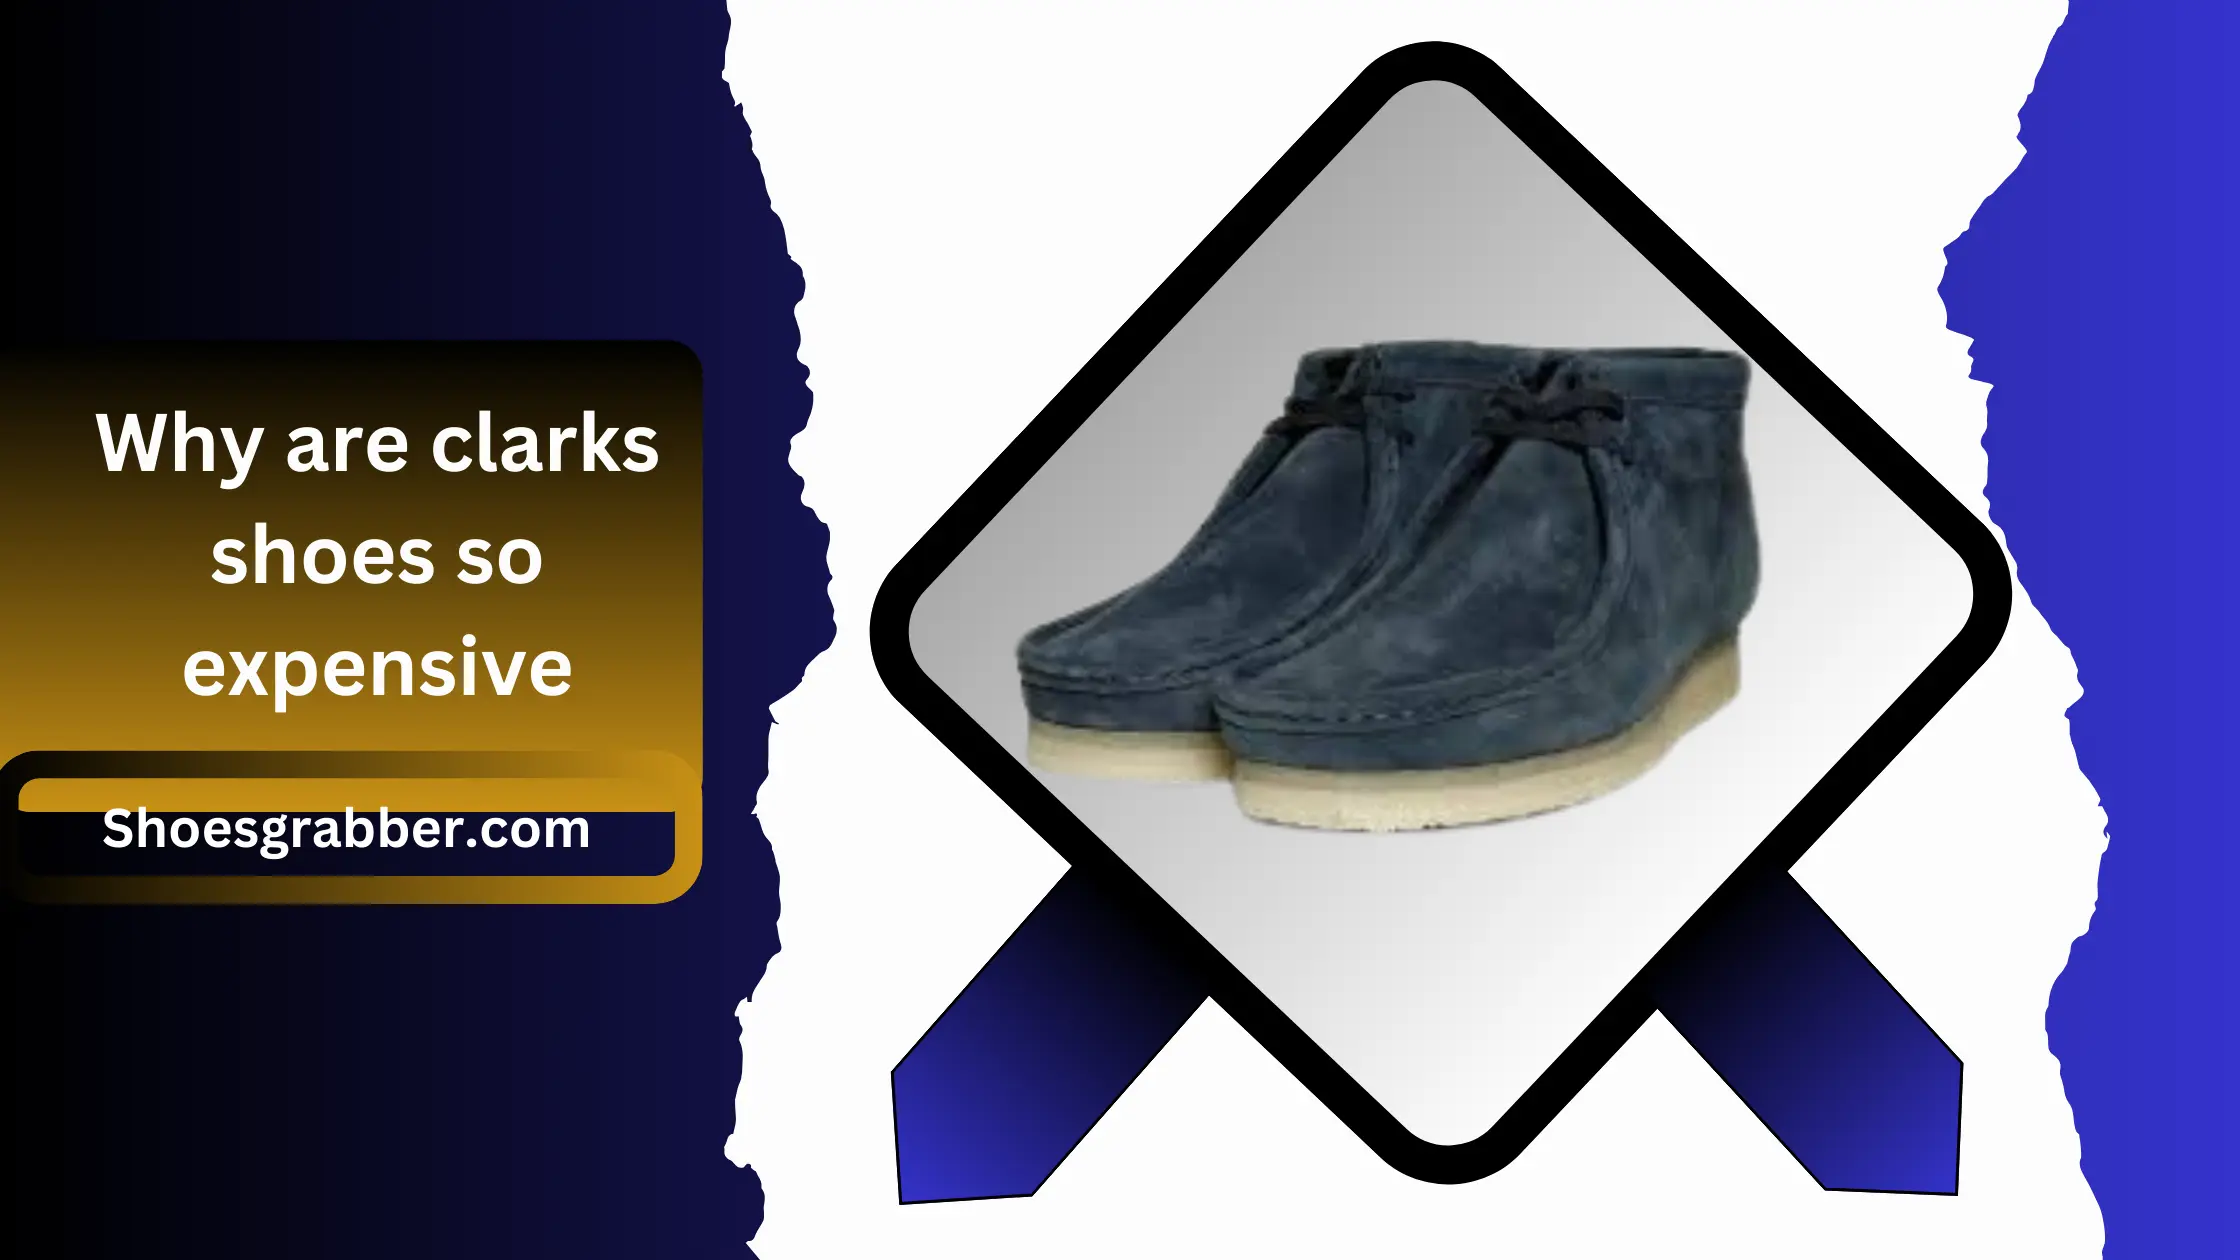 Why Are Clarks Shoes So Expensive - The Cost of Quality